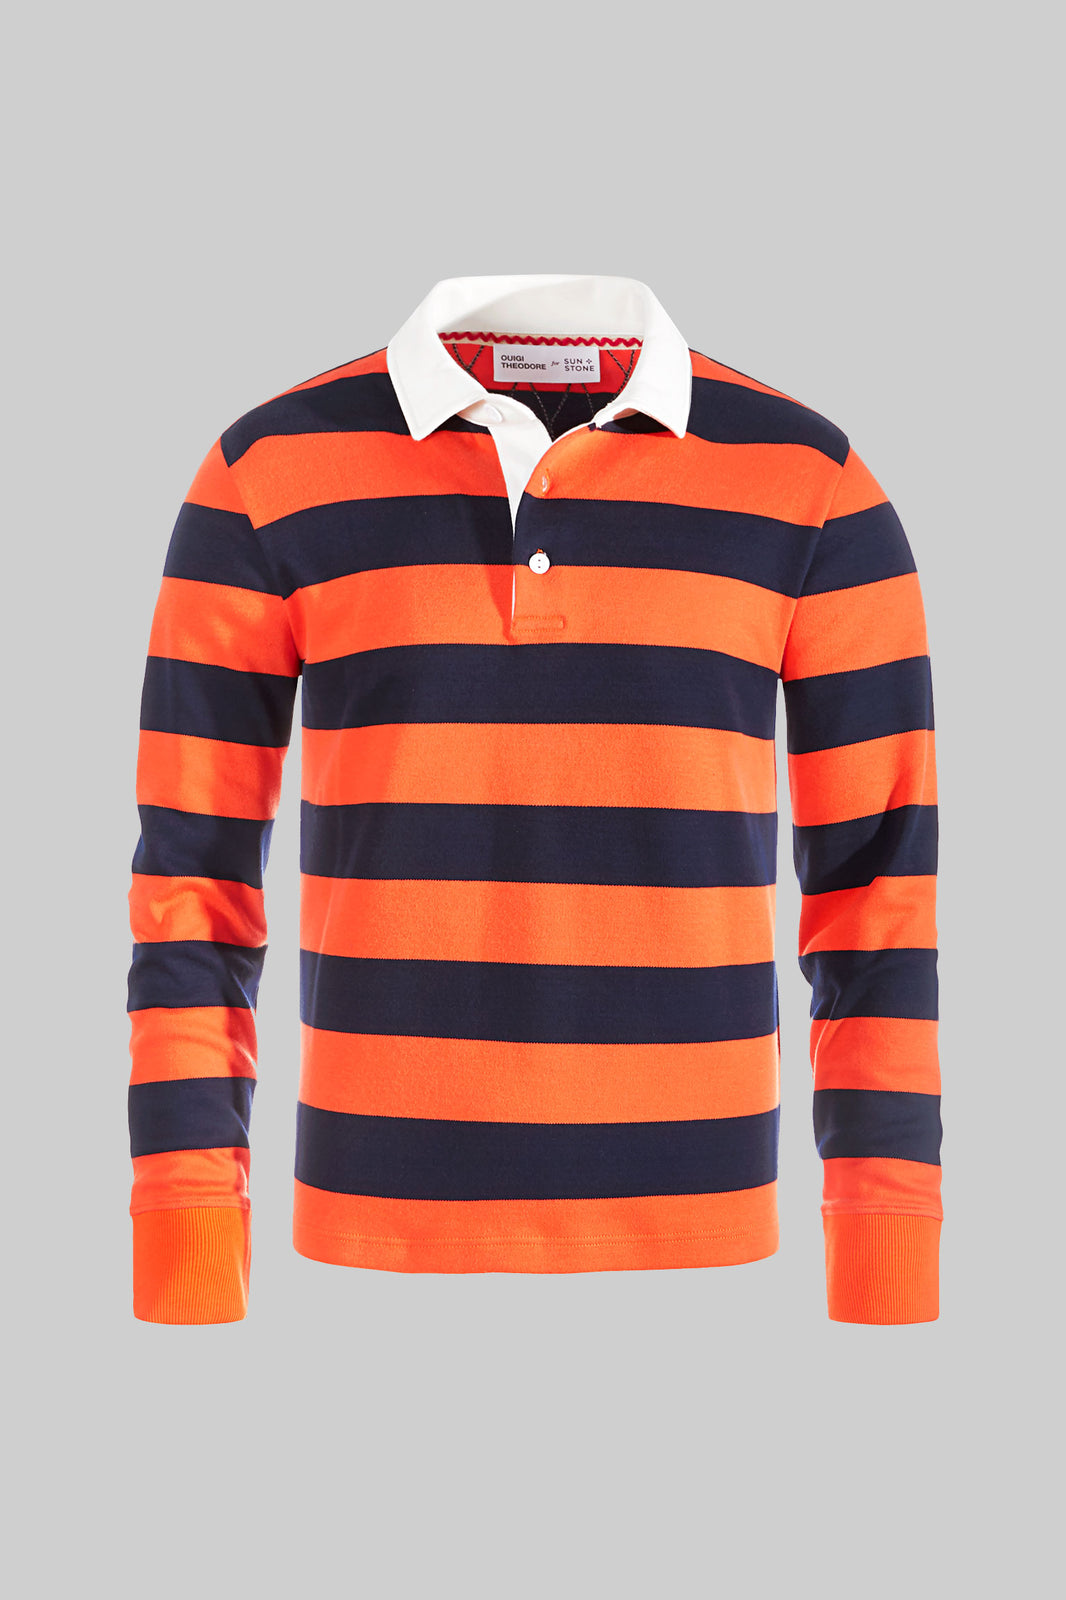 Ouigi Theodore for Men's Striped Rugby Shirt, Created for Macy's